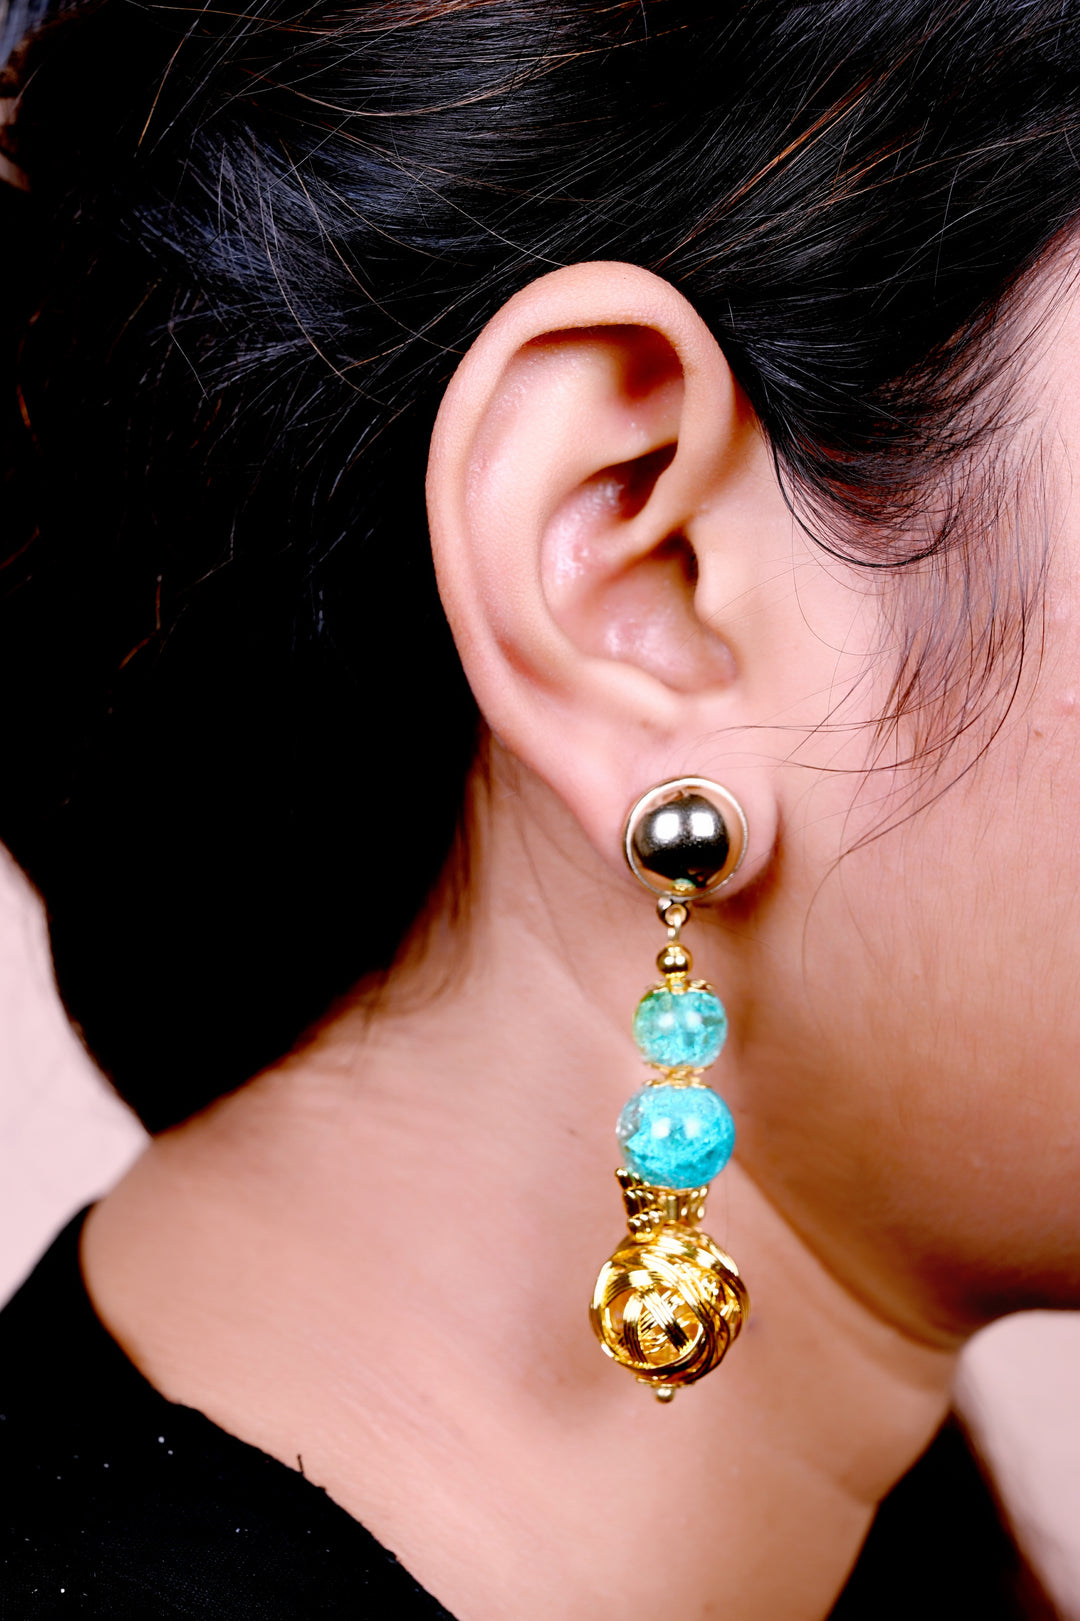 Round Glass Crackle Beads Earring Styled With Metal Charms & Metal Wire Balls